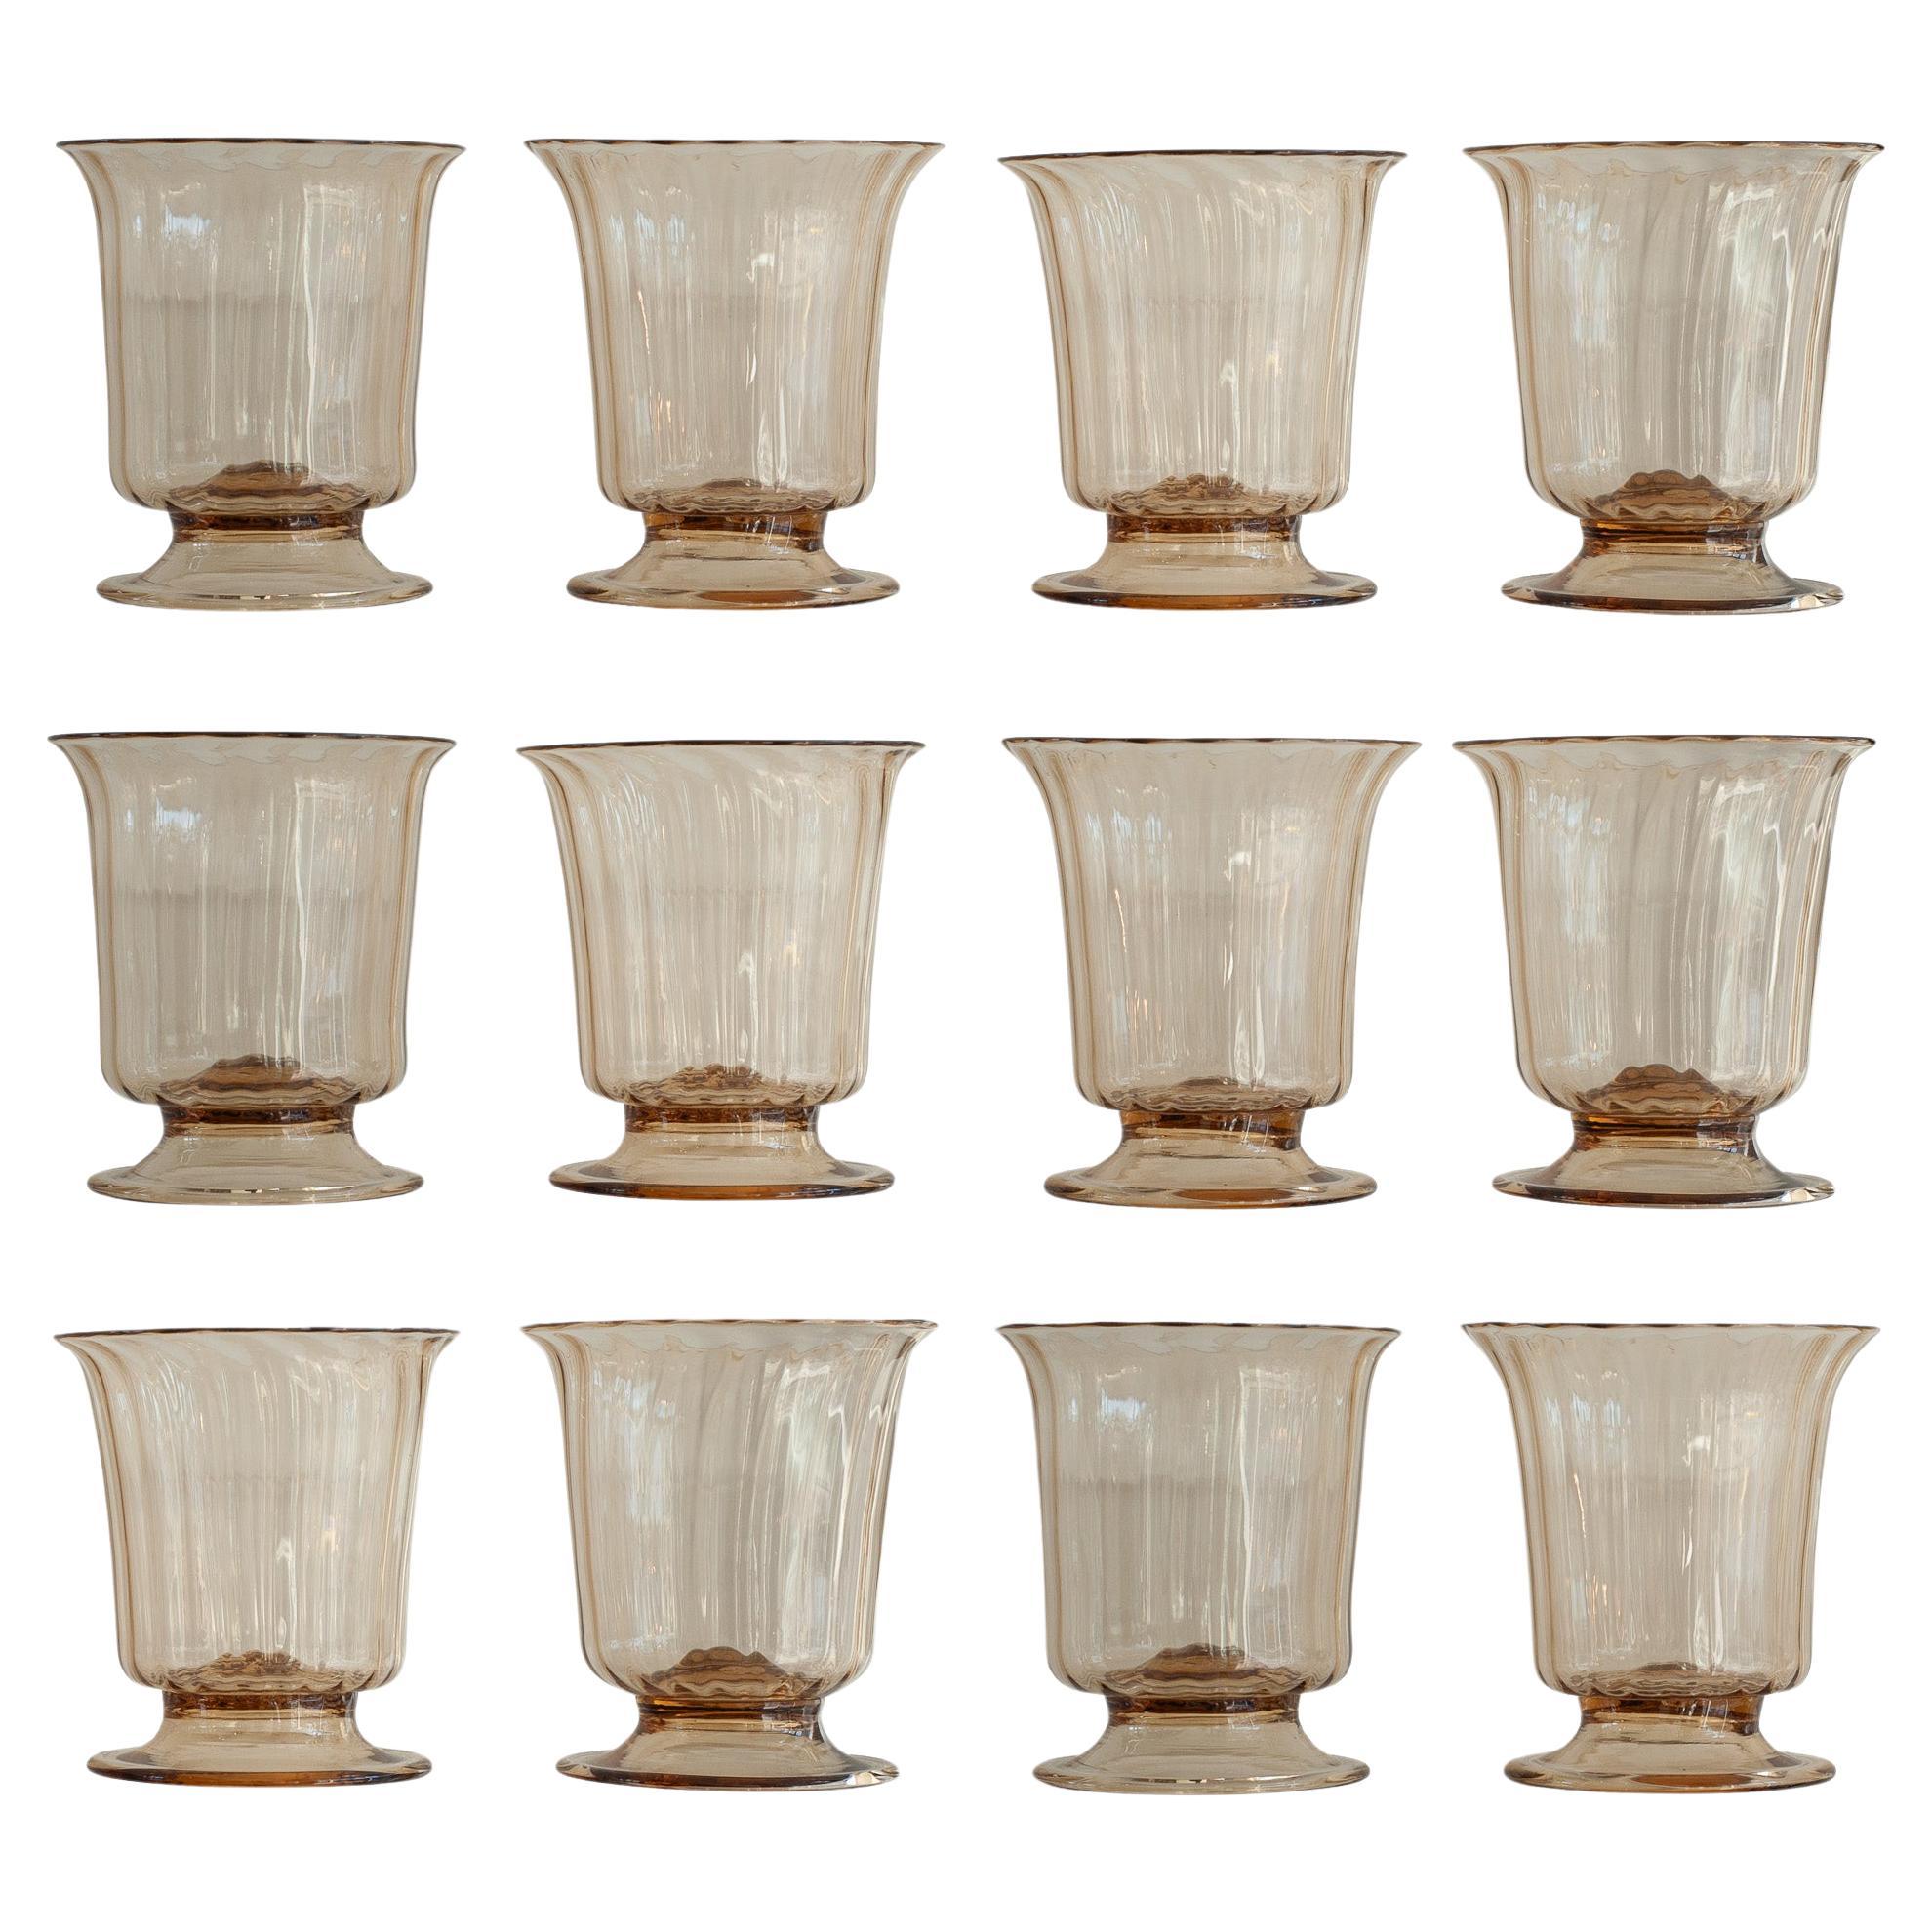 Contemporary Set of 12 Fluted Murano Glass Tumblers in Soft Amber 